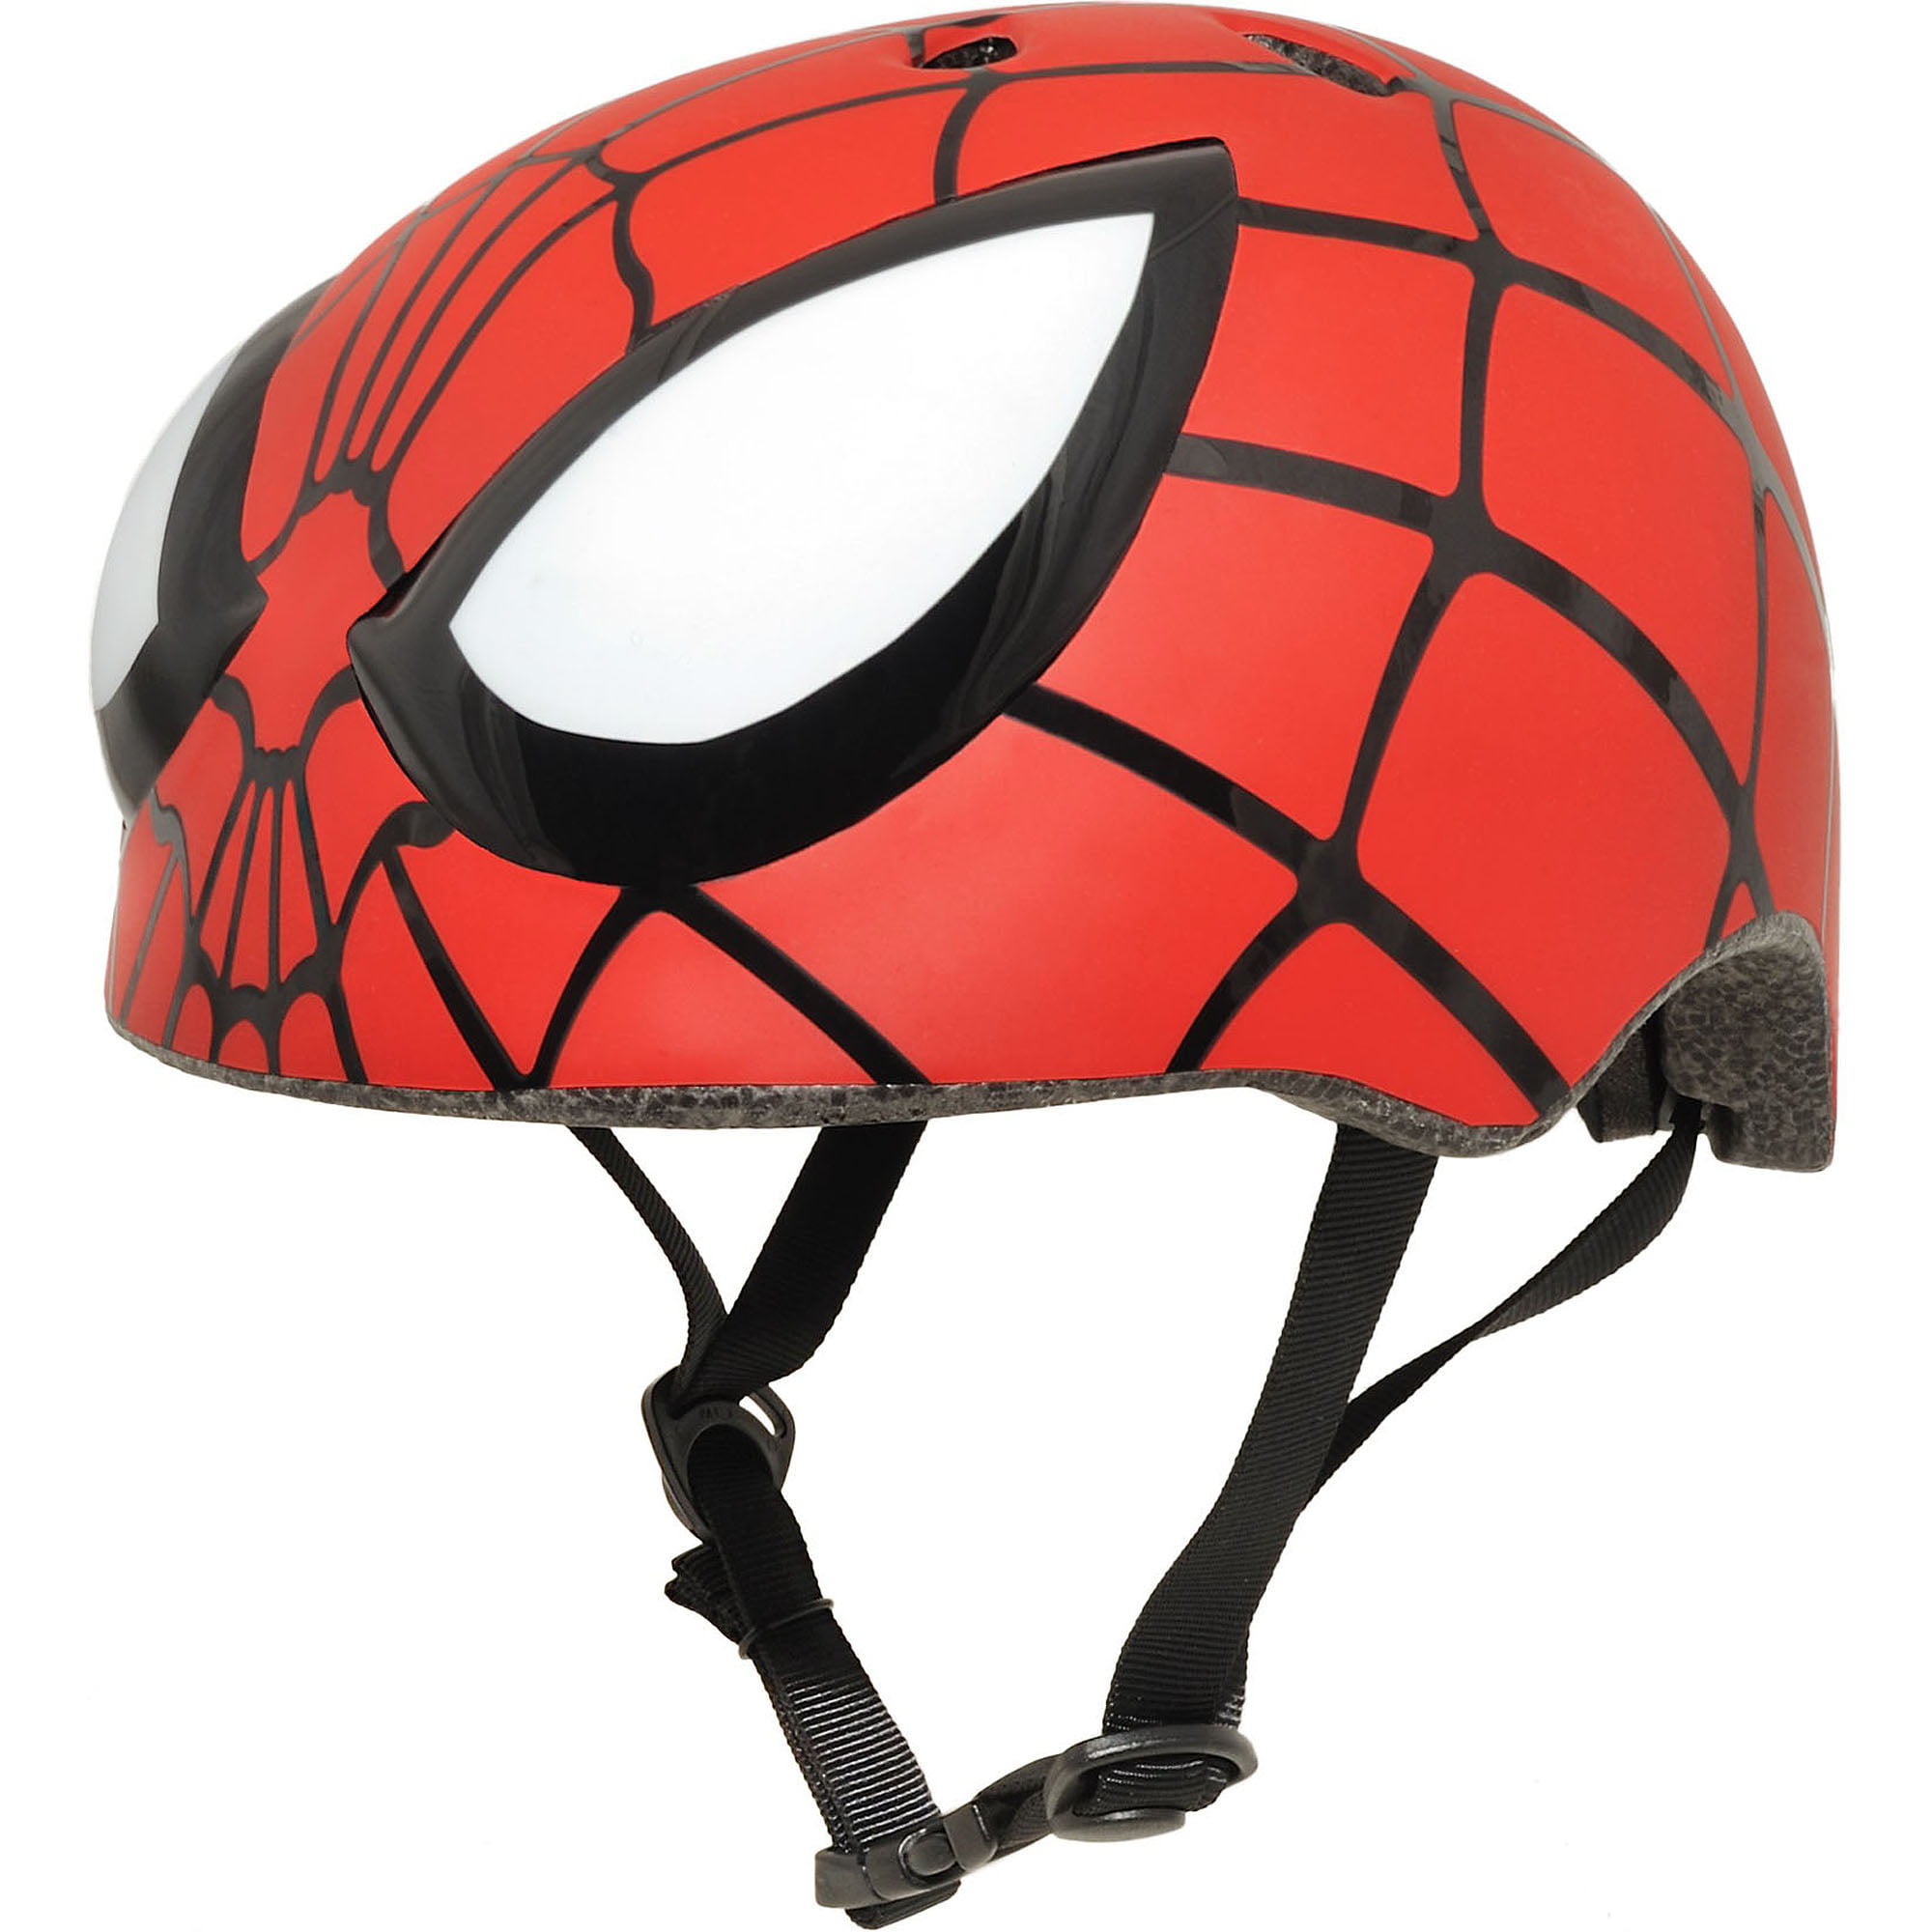 Where can you buy kids' helmets?